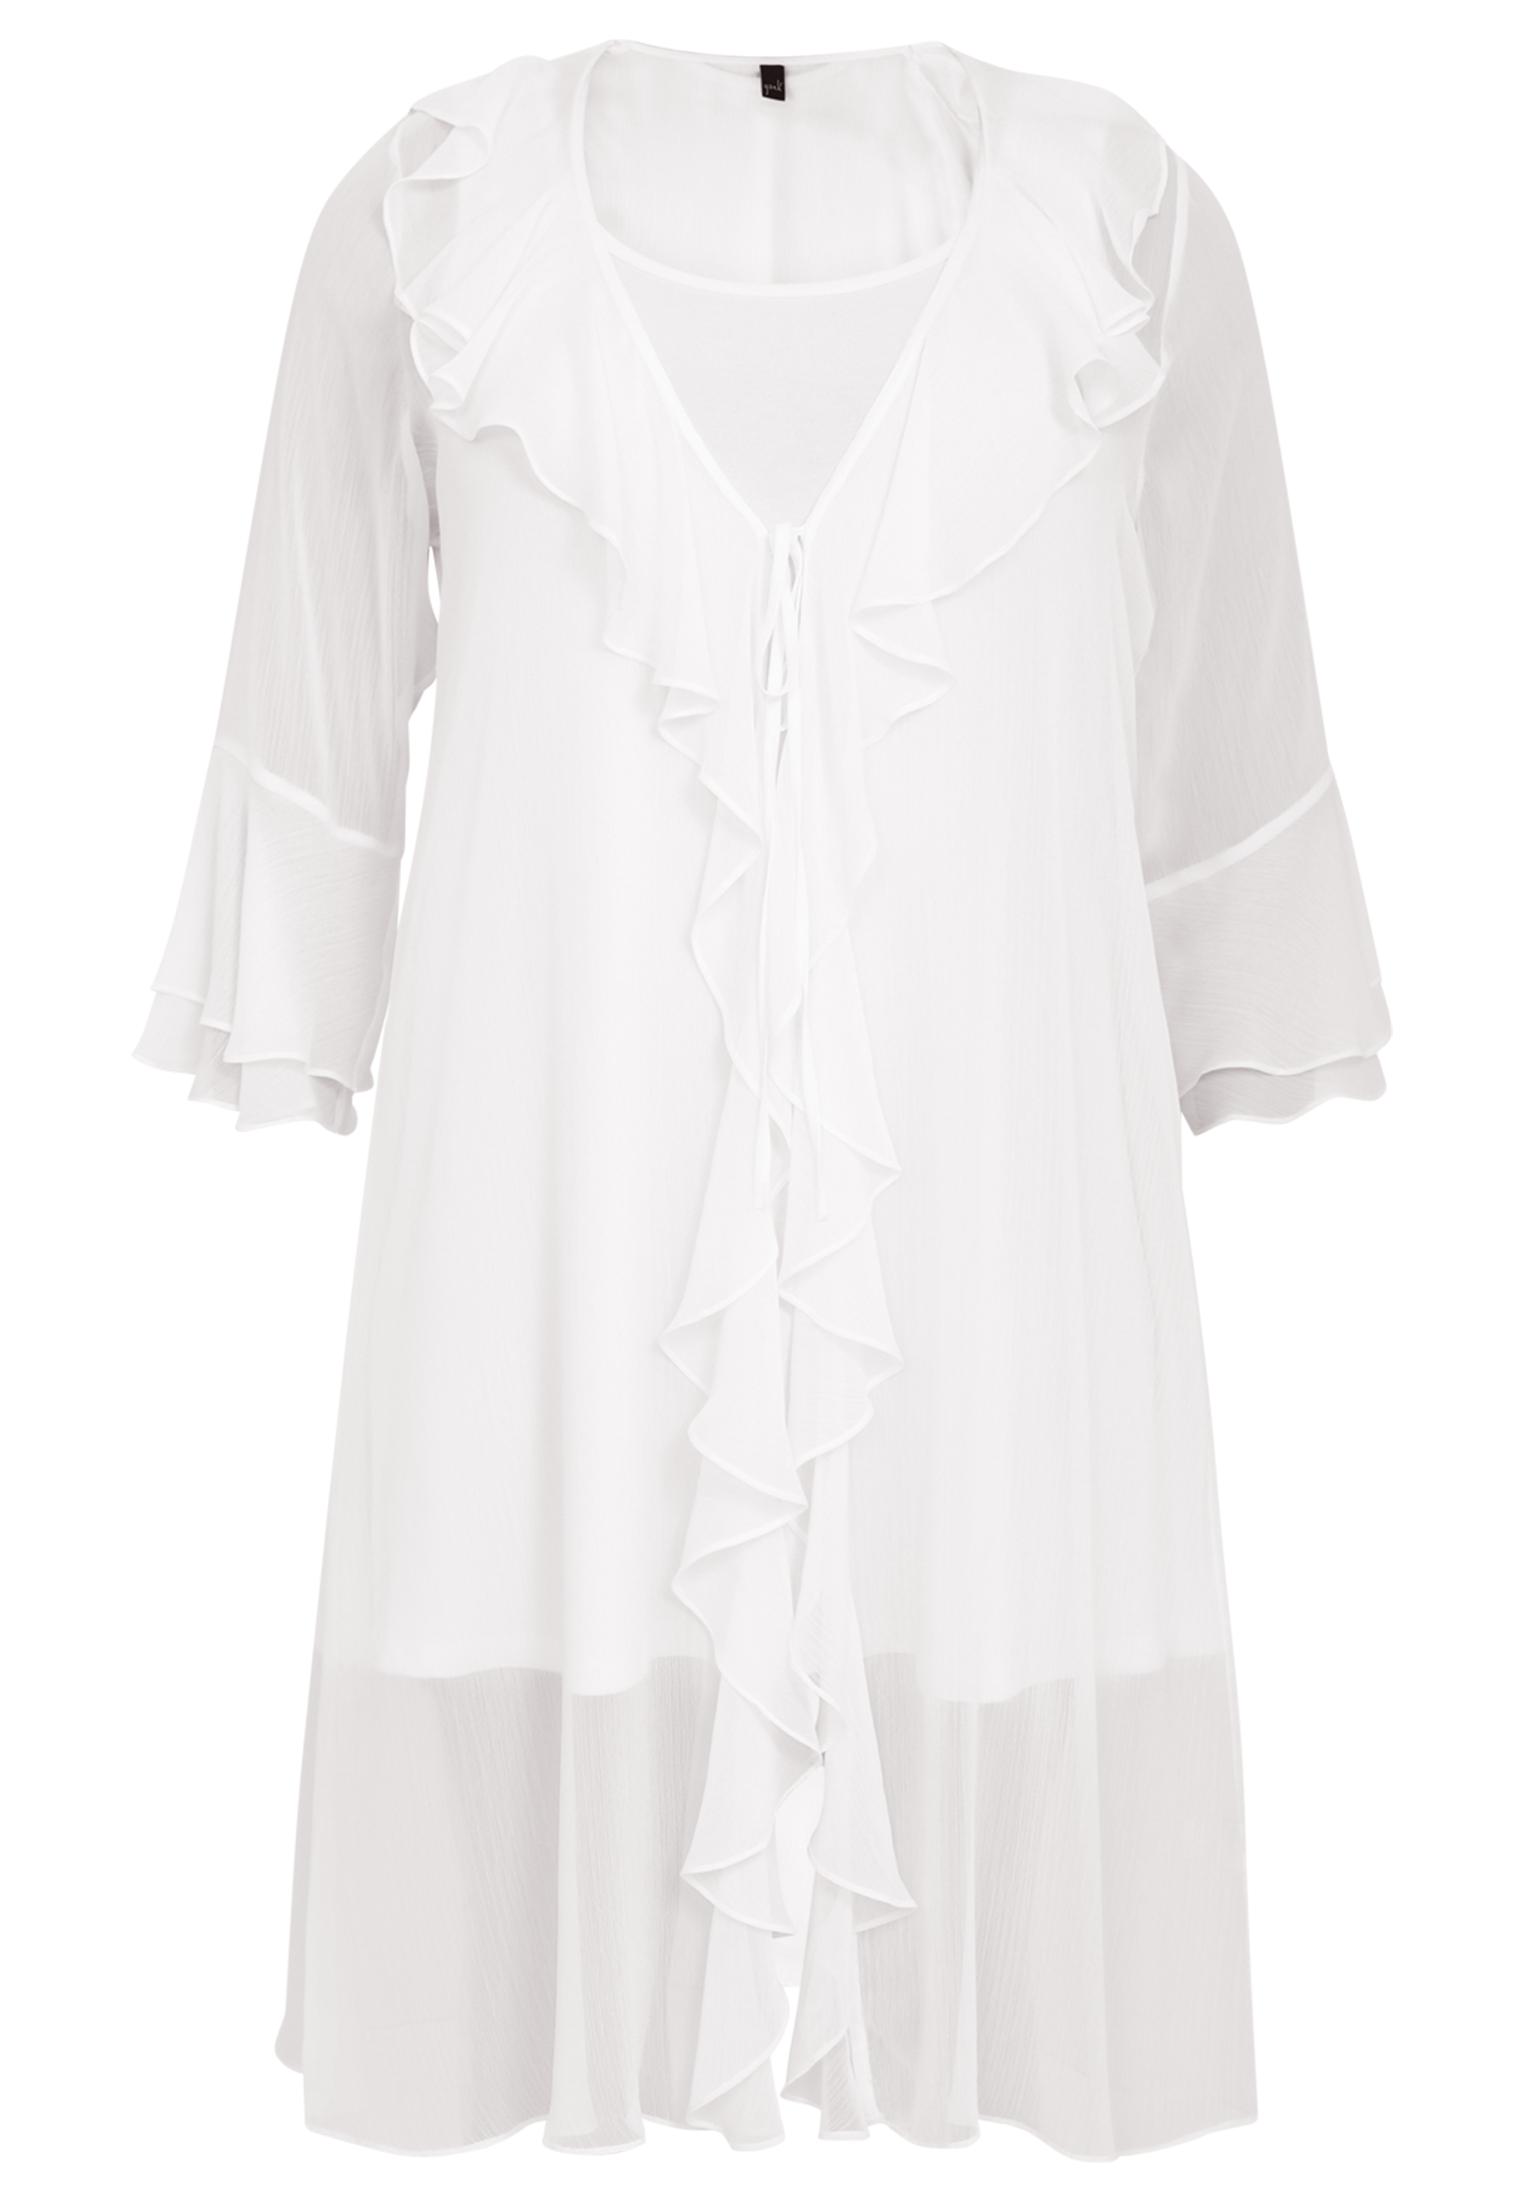 Cardi-blouse frilled VOILE